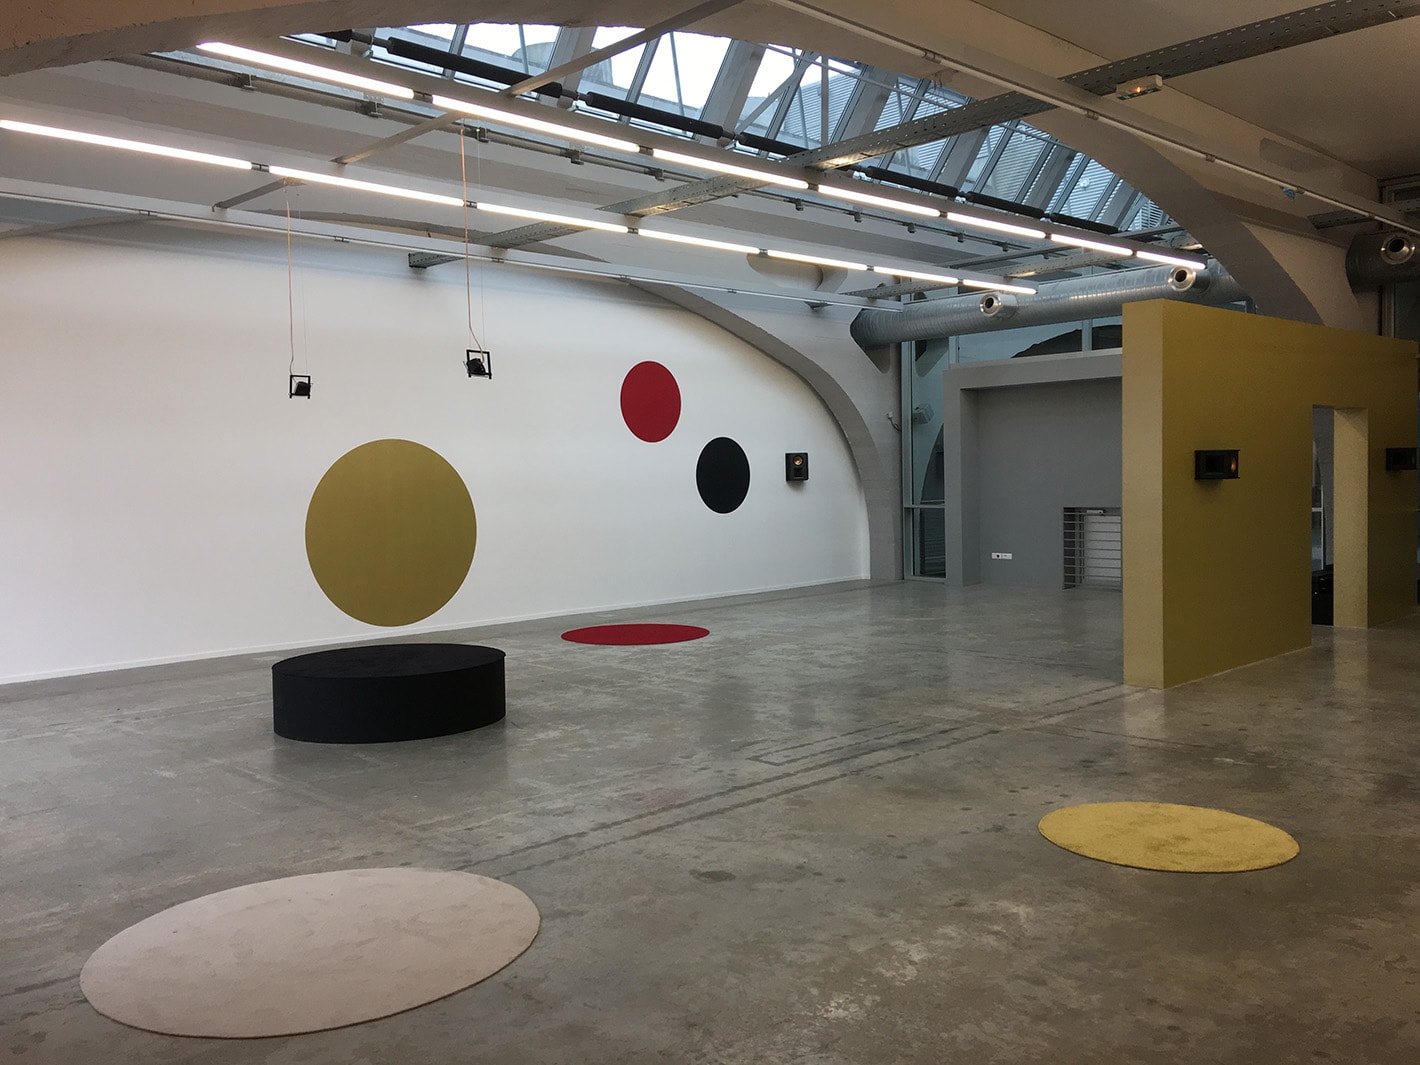 Cédric Maridet participates in “OOOL / Sound Fictions” at La Kunsthalle, Mullhouse, France